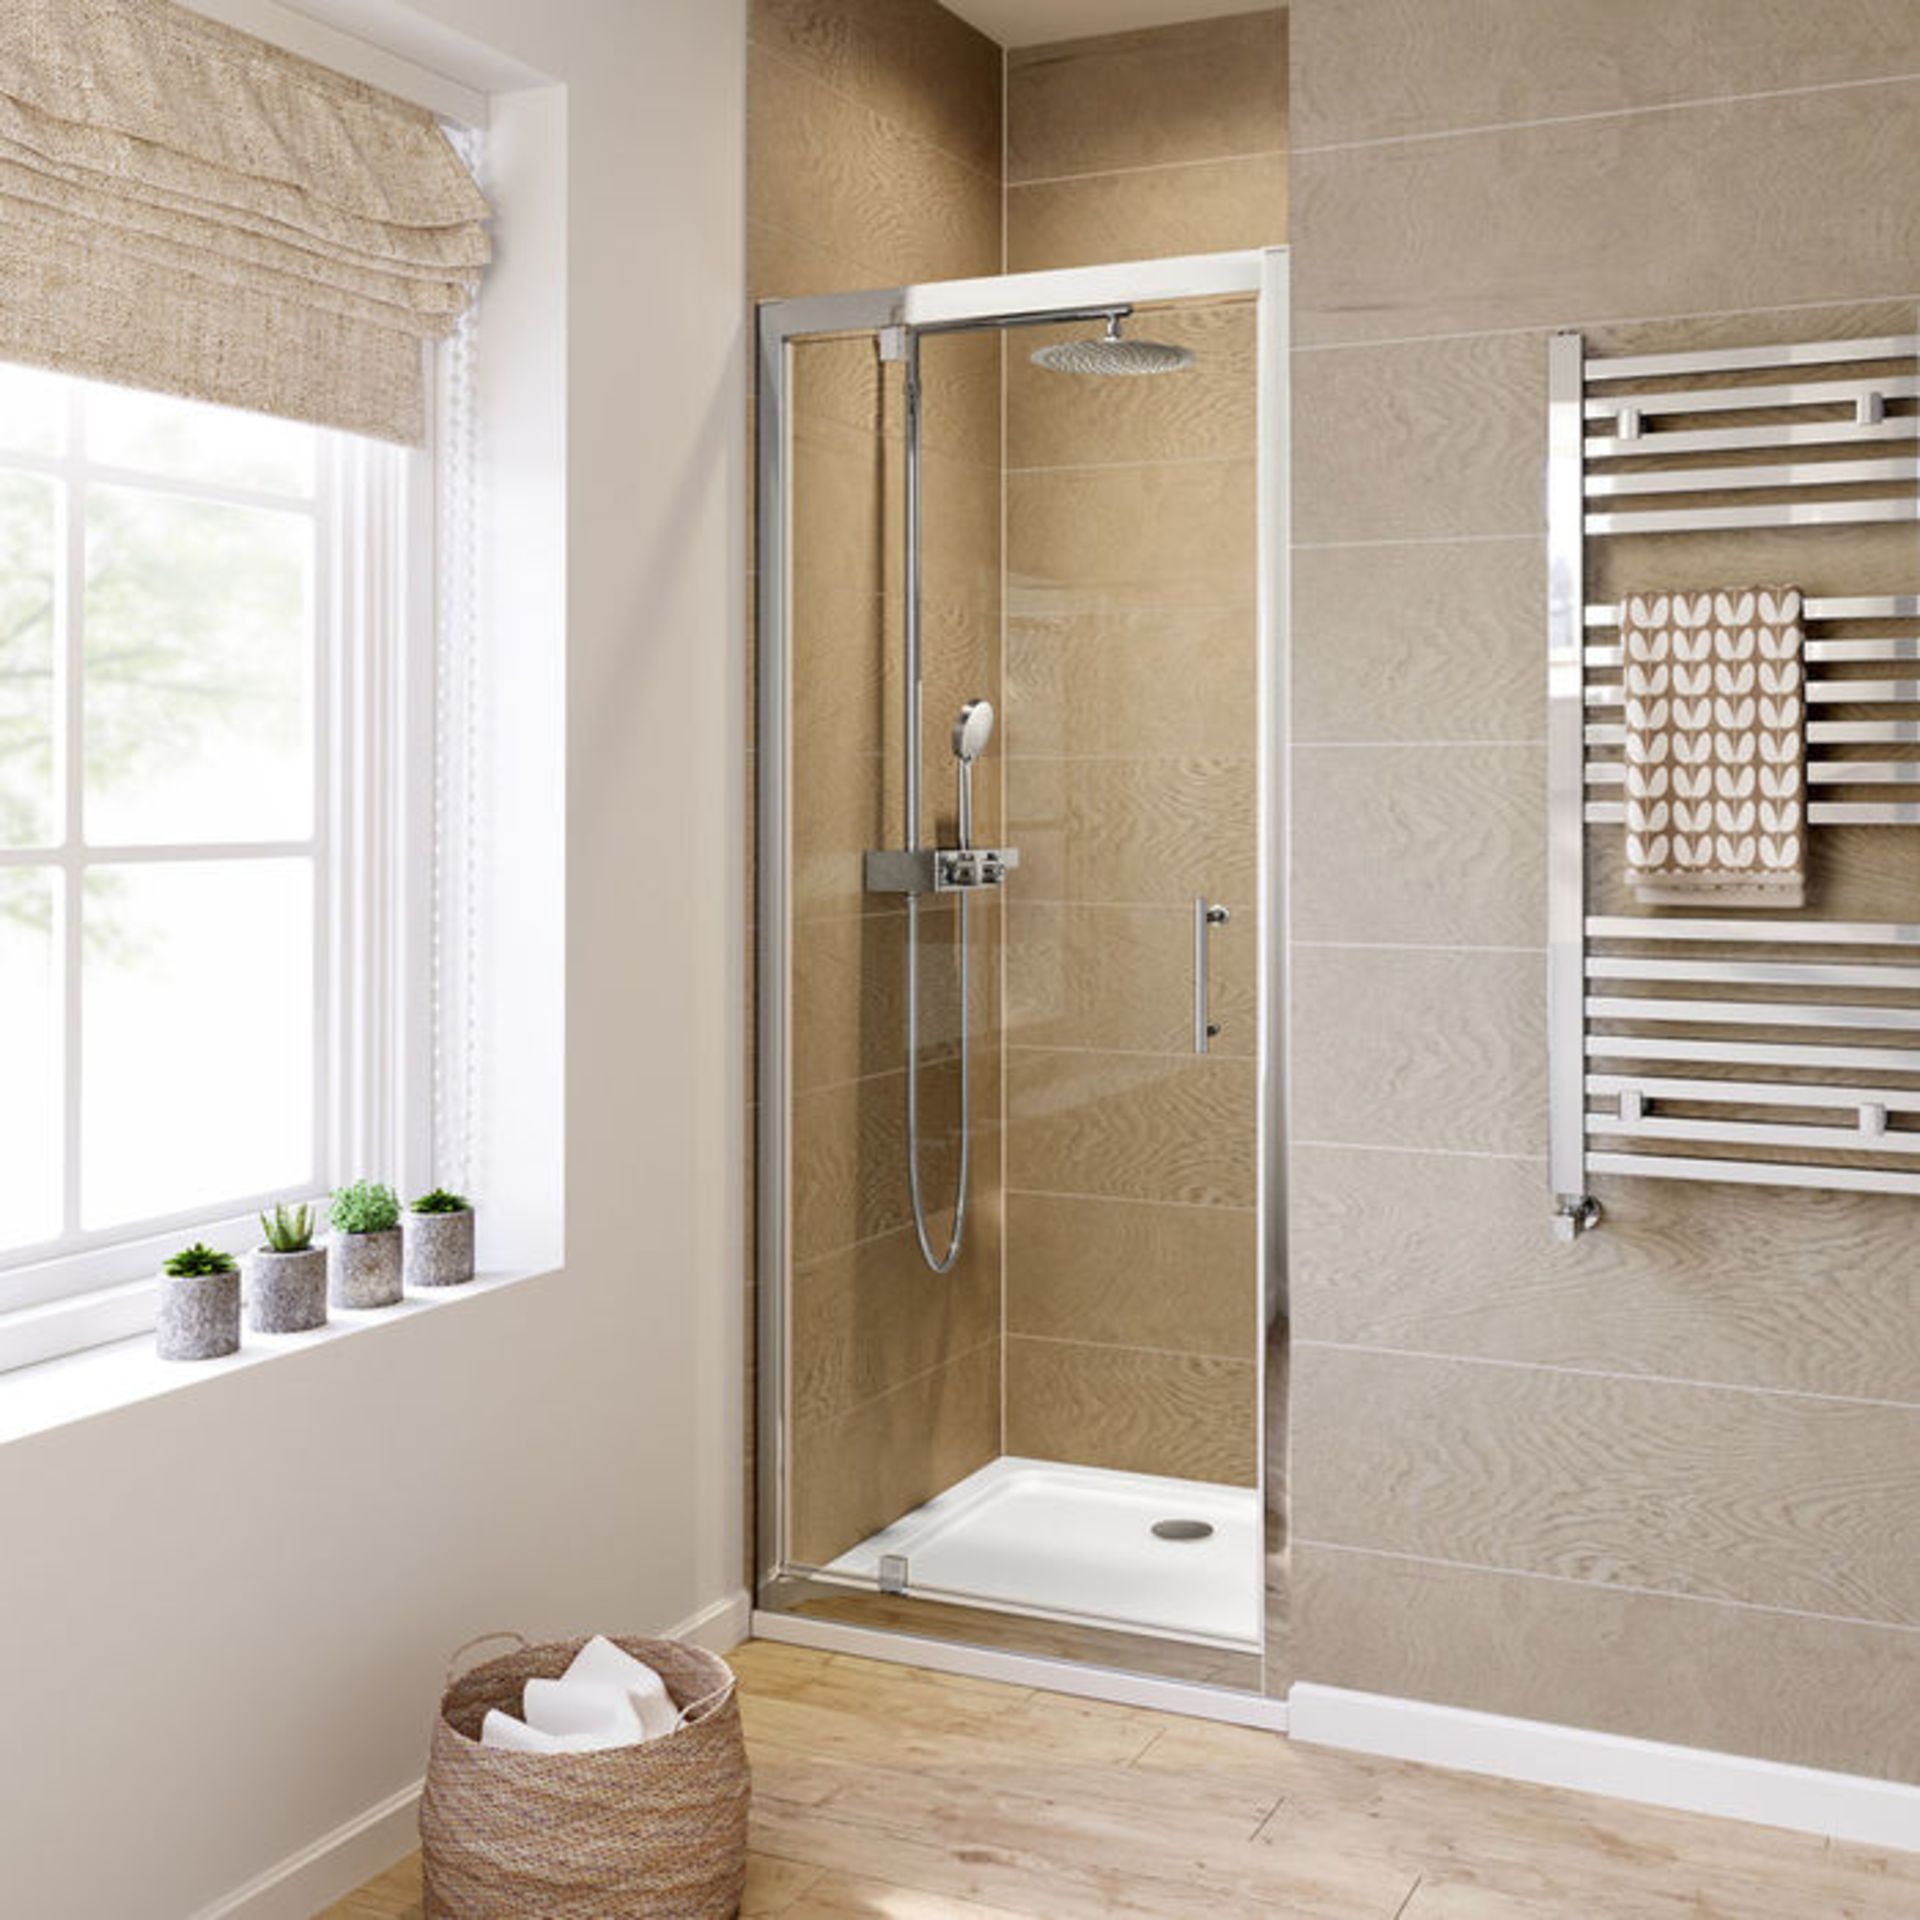 New 700mm - 6mm - Premium Pivot Shower Door. RRP £299.99.8mm Safety Glass Fully Waterproof T... - Image 3 of 3